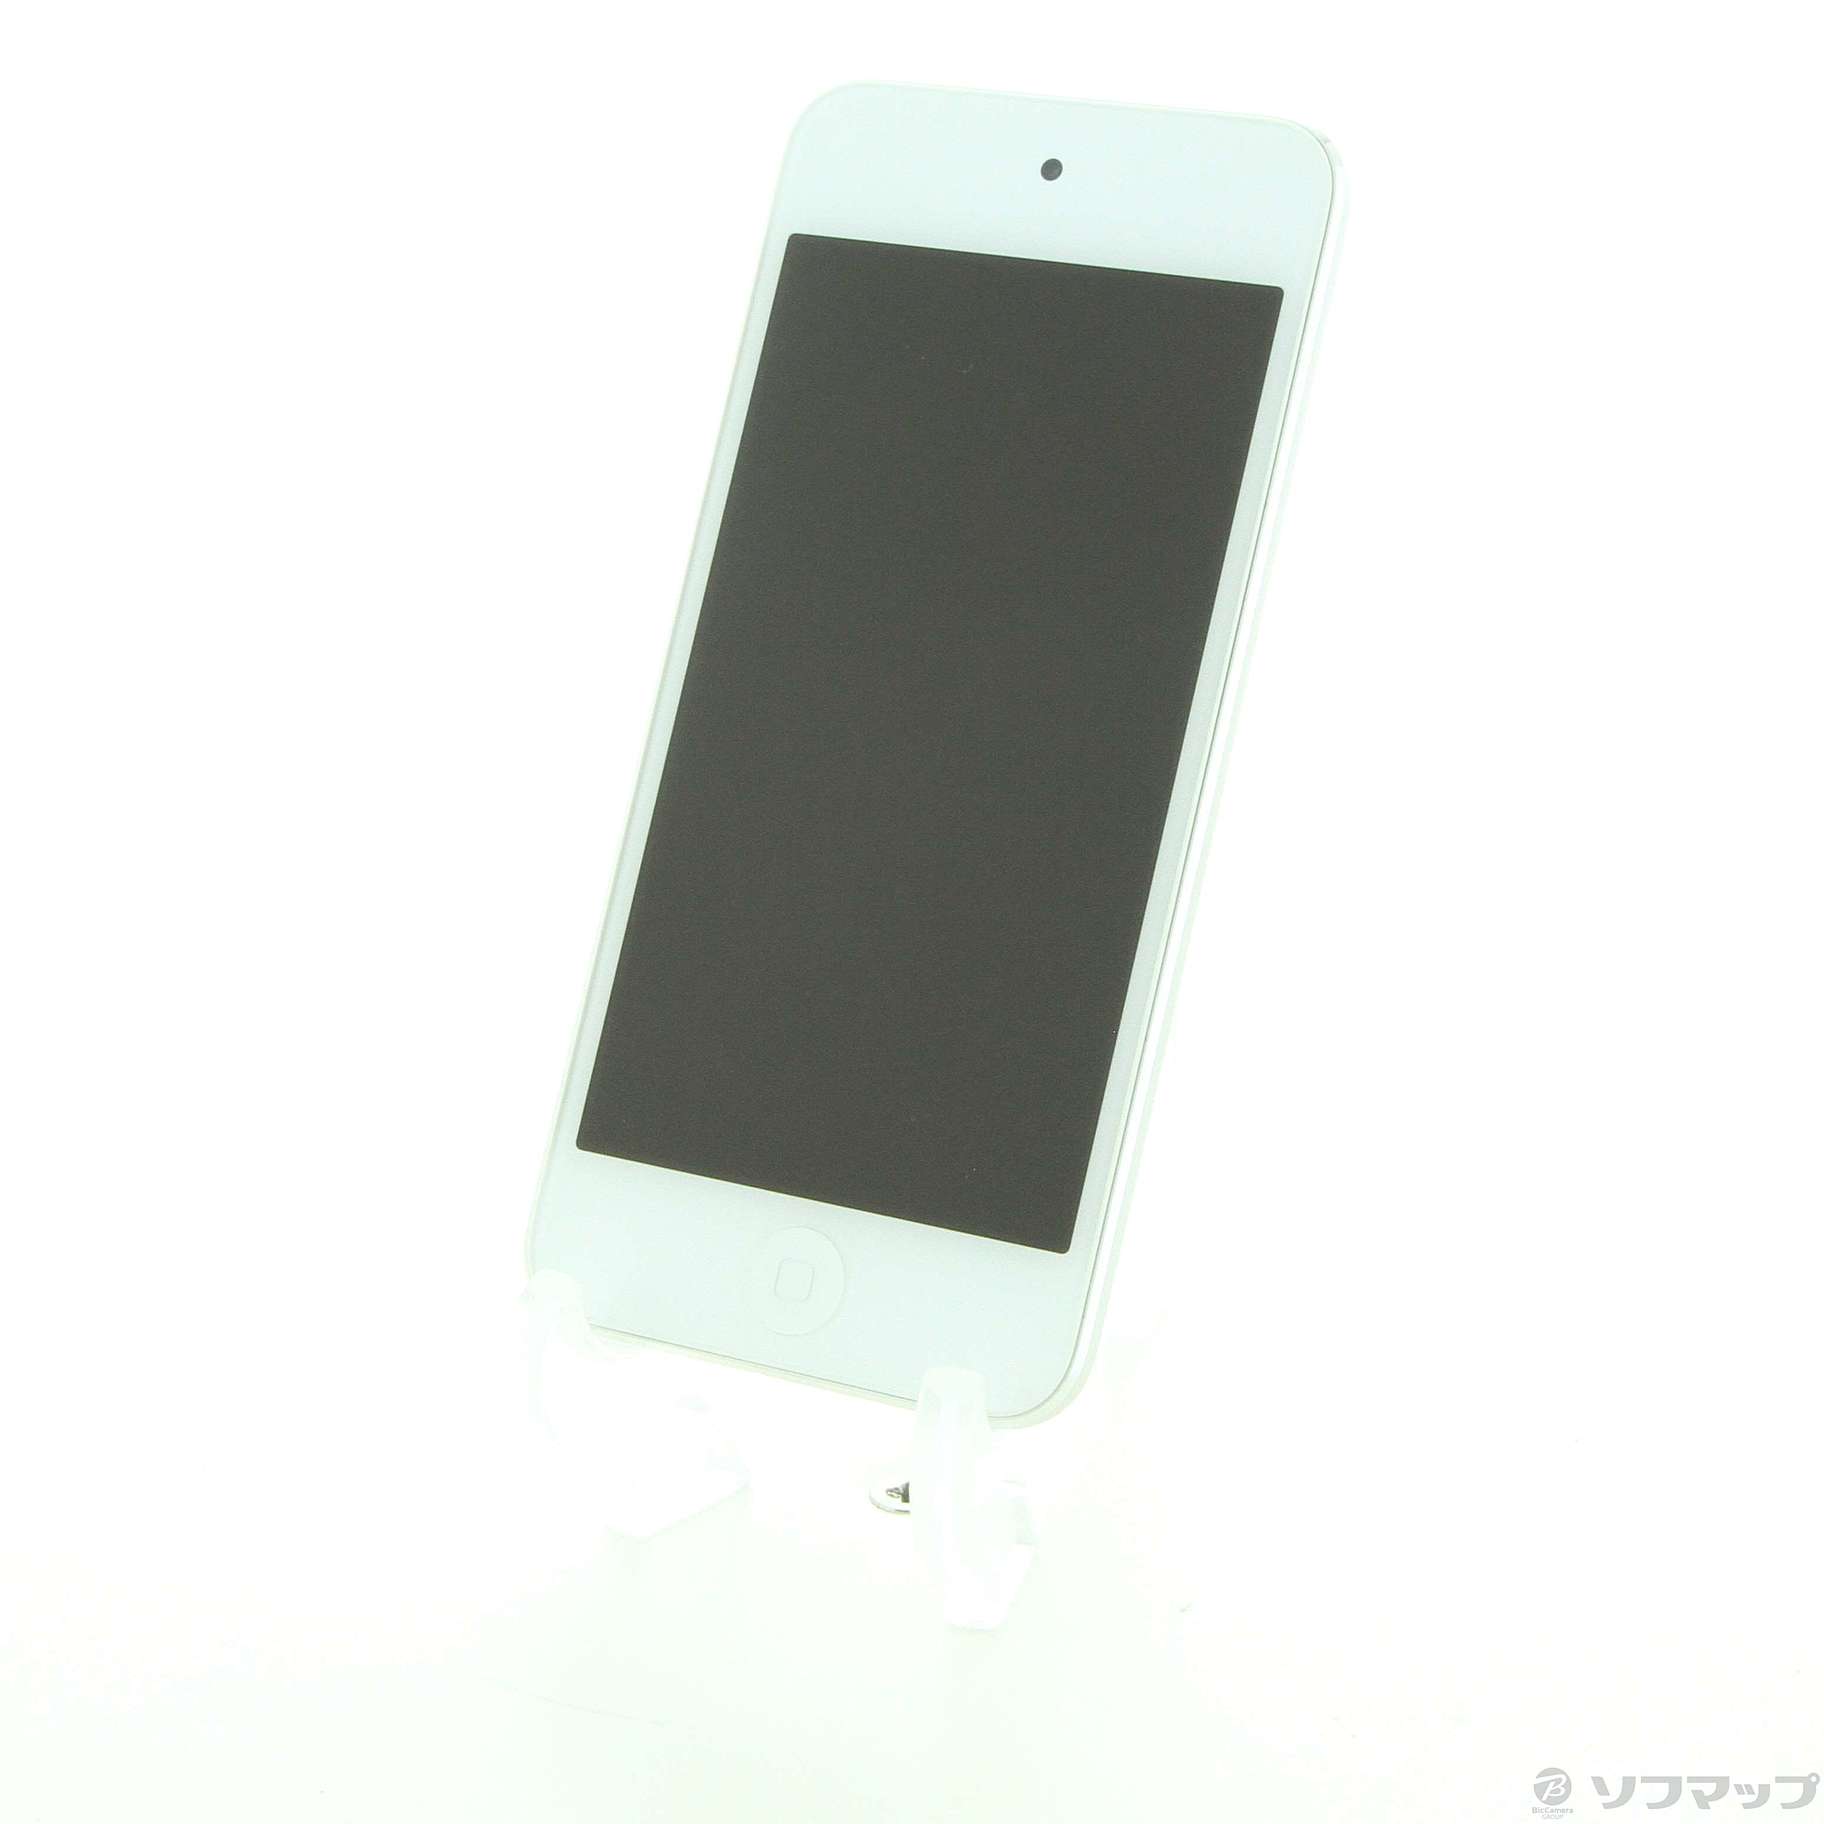 iPodtouch 第6世代 32GB